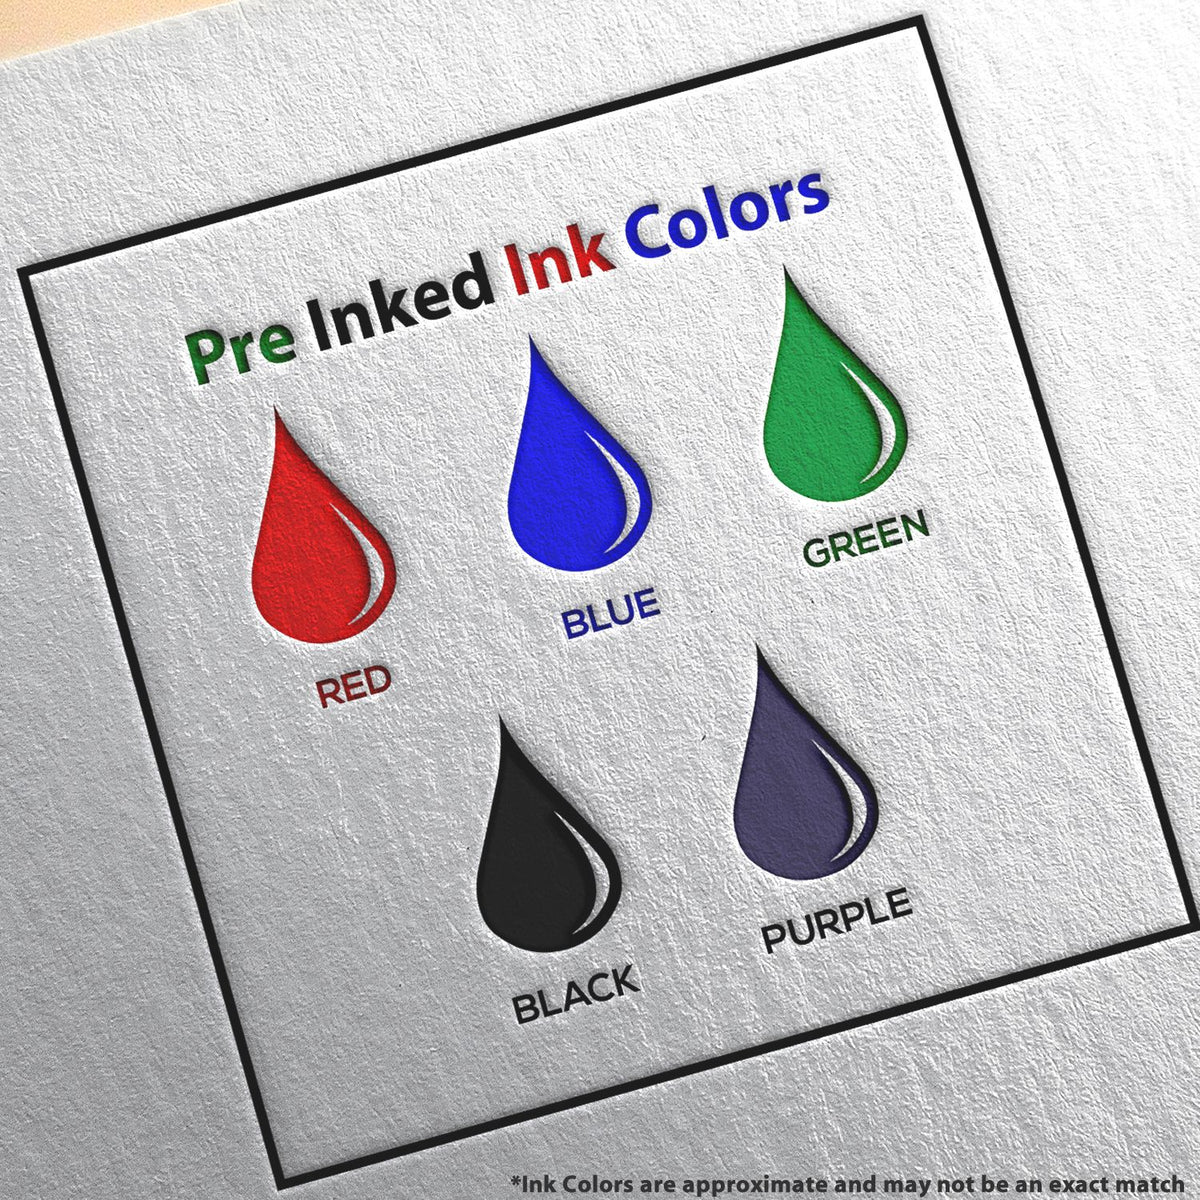 A picture showing the different ink colors or hues available for the Premium MaxLight Pre-Inked Michigan Engineering Stamp product.